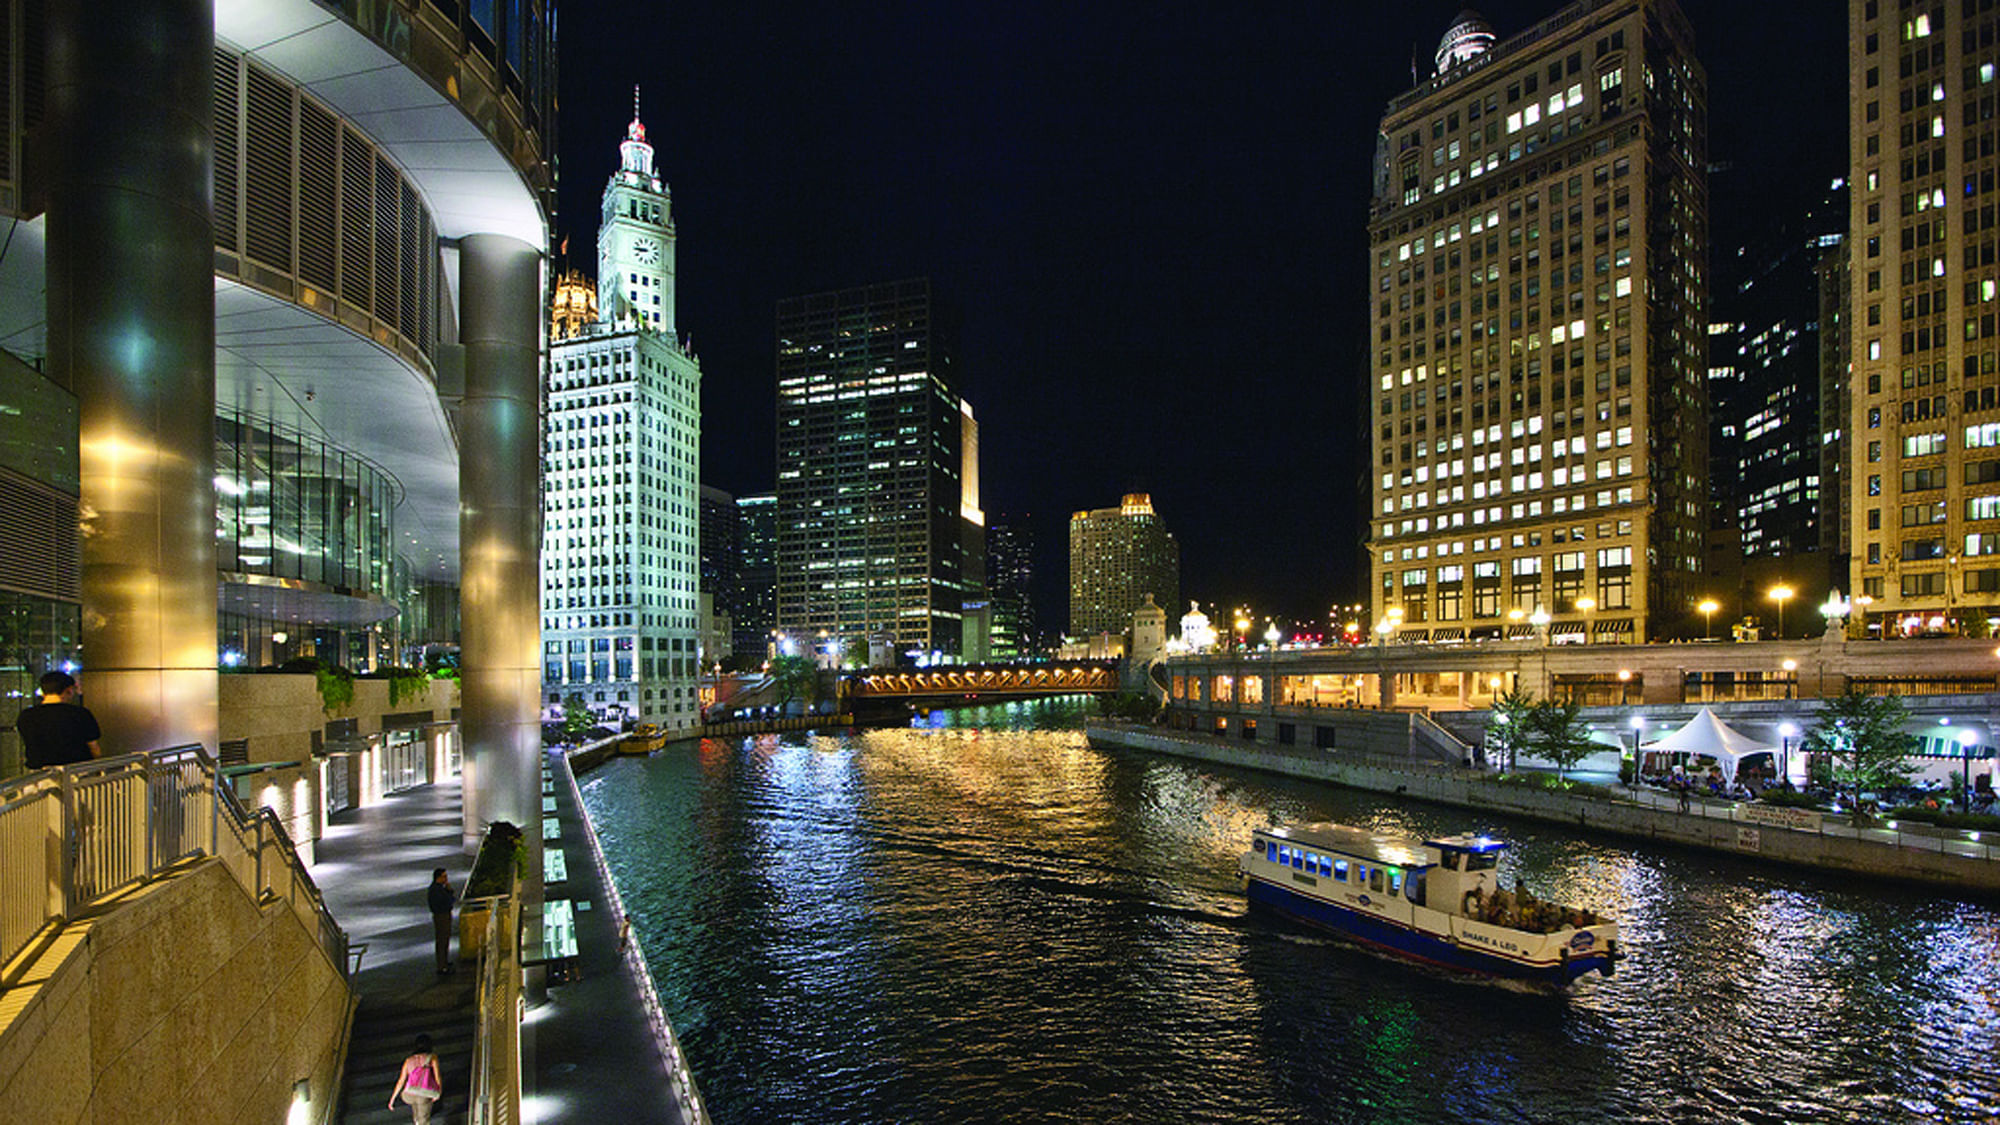 The gorgeous Chicago skyline by night. (Photo Courtesy: <a href="http://www.choosechicago.com/">Choose Chicago</a>)